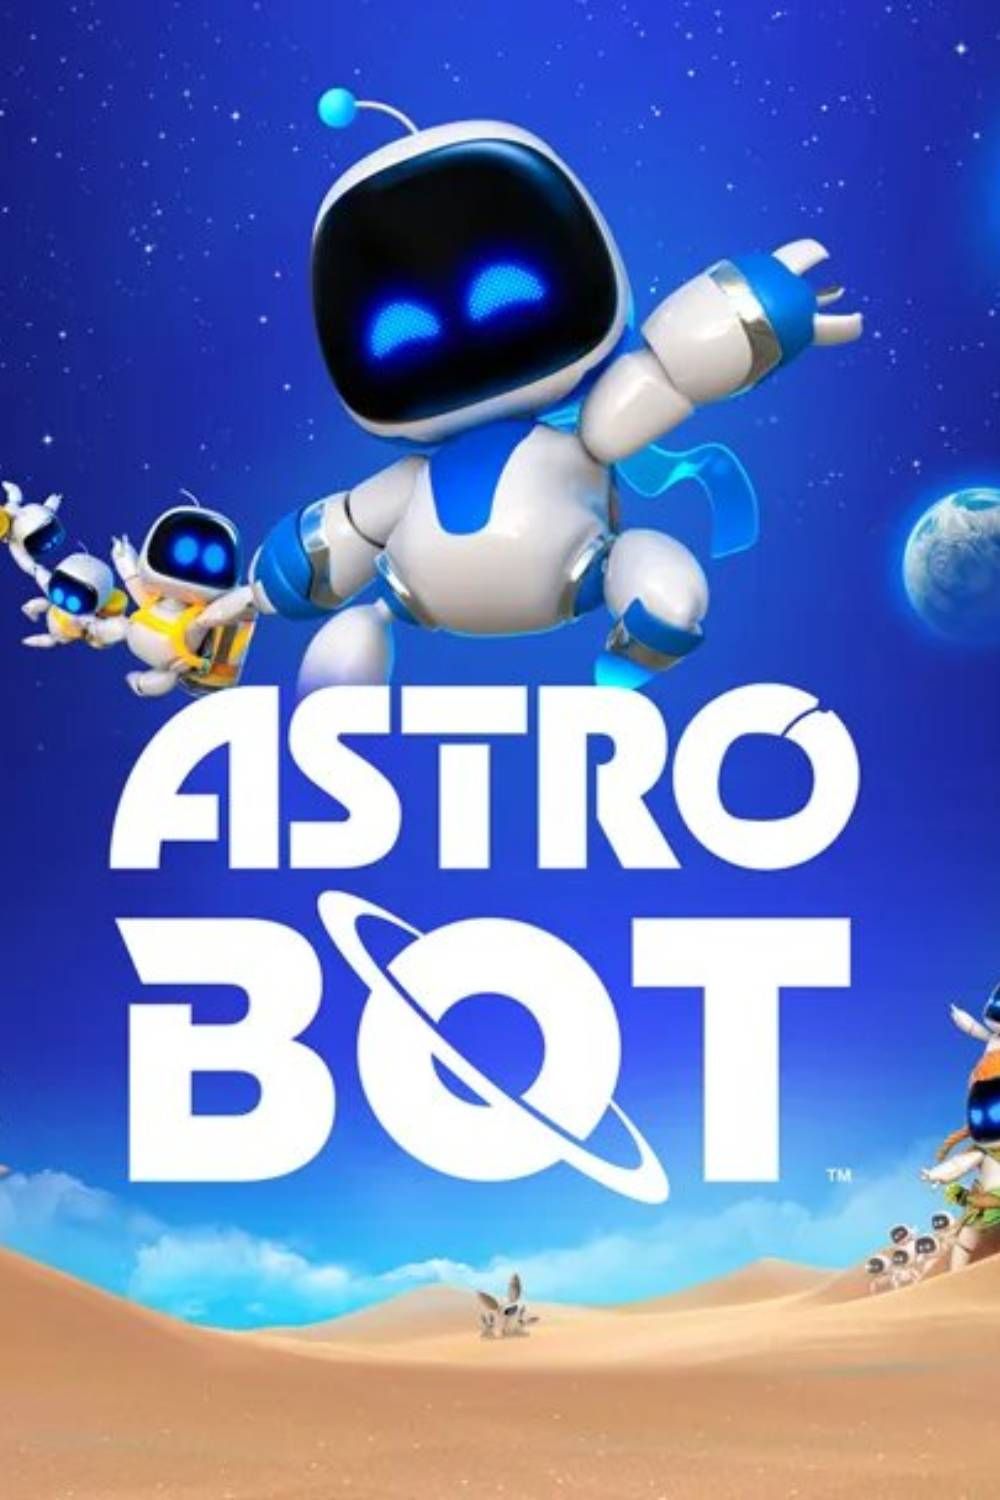 Astro Bot Tag Page Cover Art